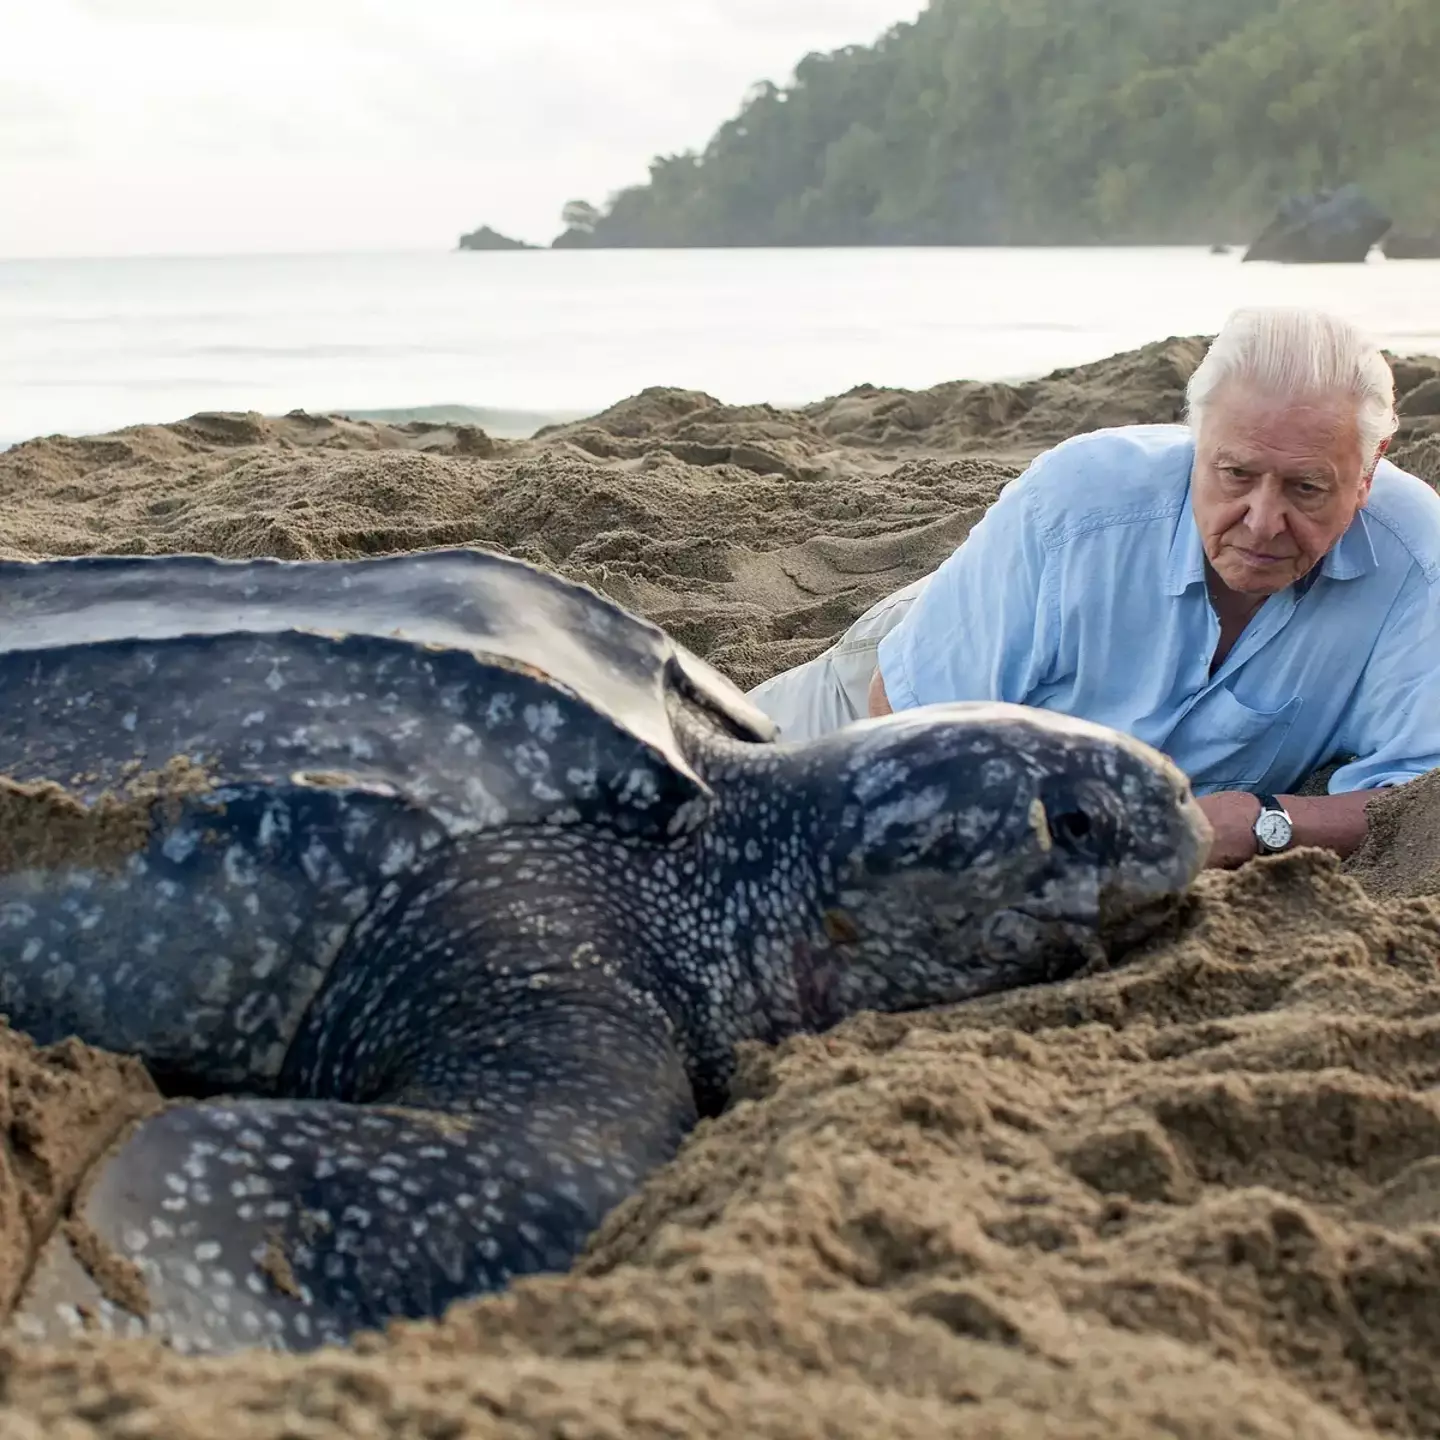 David Attenborough has earned an absolutely staggering amount per minute from his latest TV shows.